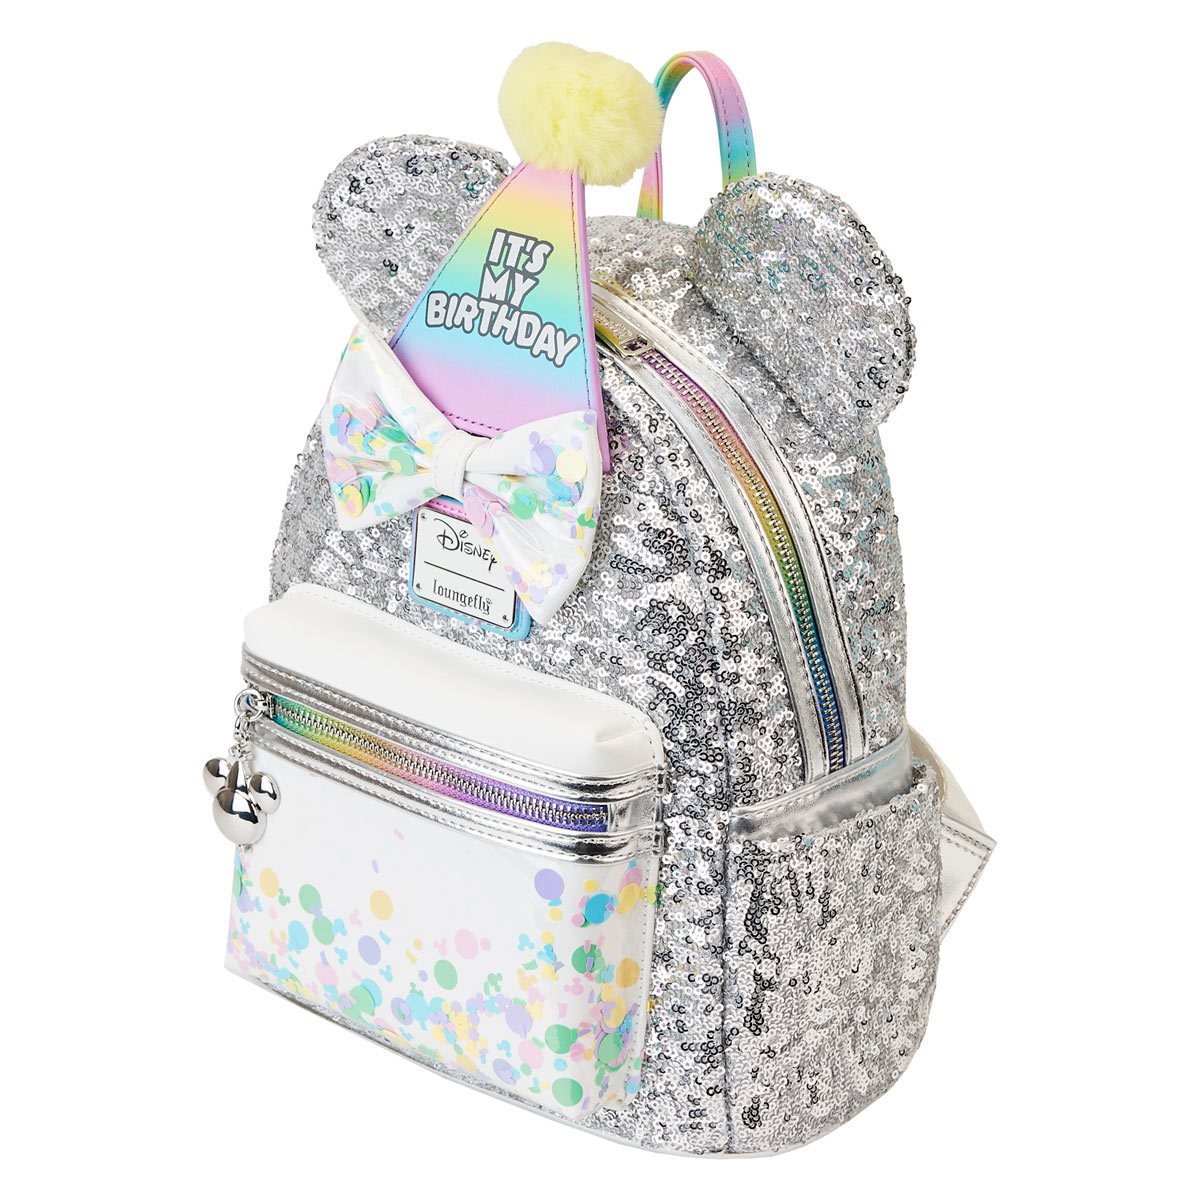 Disney Mickey Mouse Women's Mini Backpack Gold 